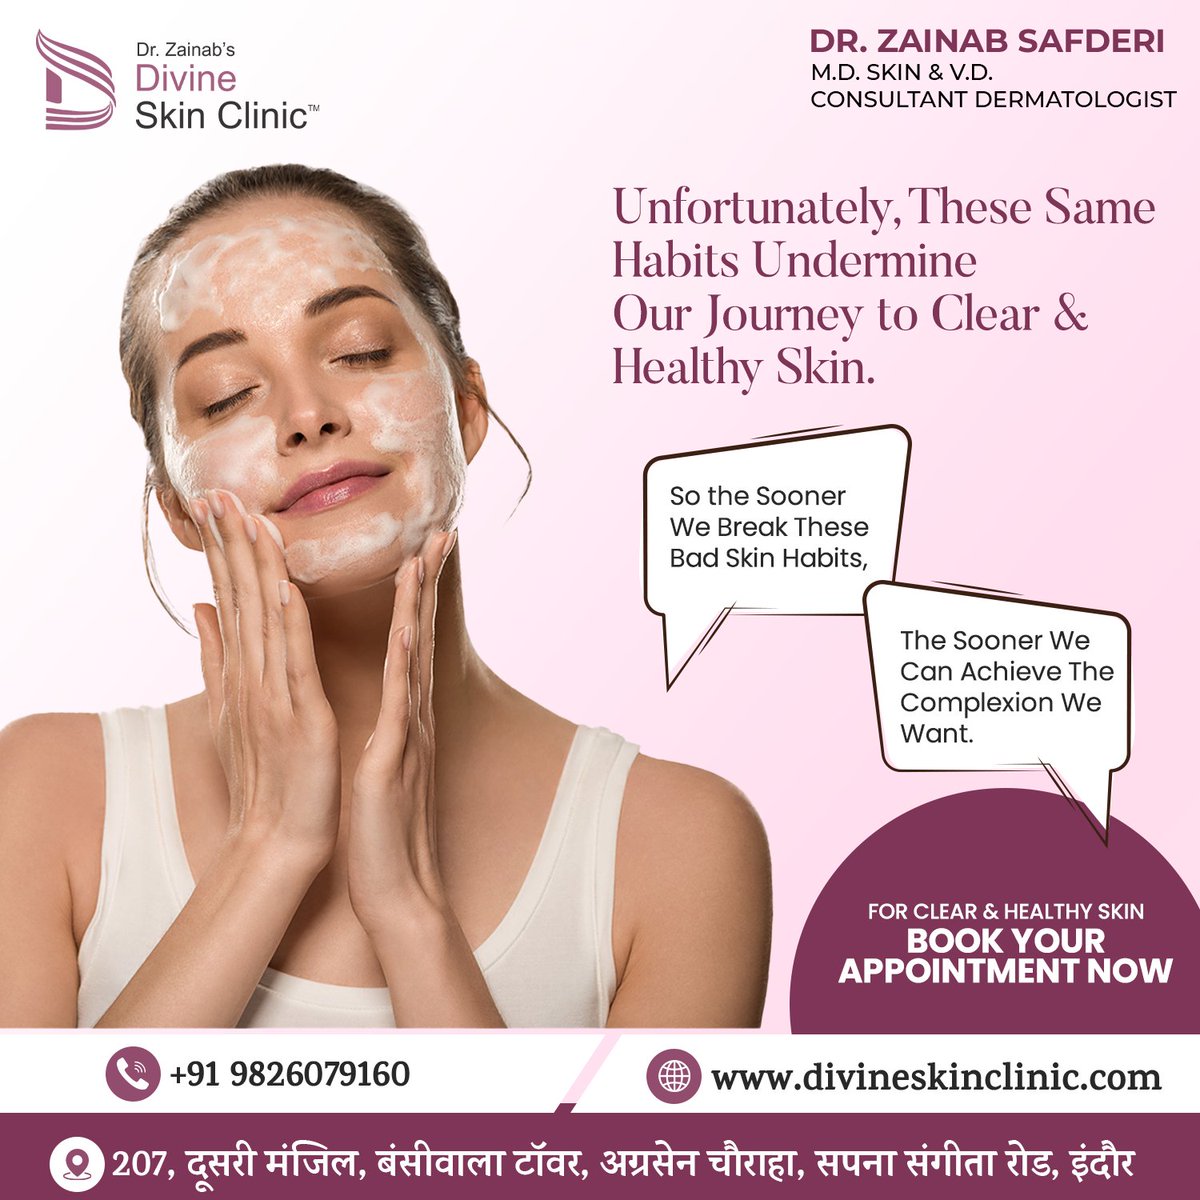 Break the chains of bad skincare habits! 
#HealthySkinJourney
For Any Type of Query, Consult 
Dr. Zainab Safderi
Call at +91 9826079160

#divineskinclinic #DrZainabSafderi #winterskin #womenskin
#HealthySkin #Dermatology #skincaretreatment #skincareproduct #makeup #avoidmakeup